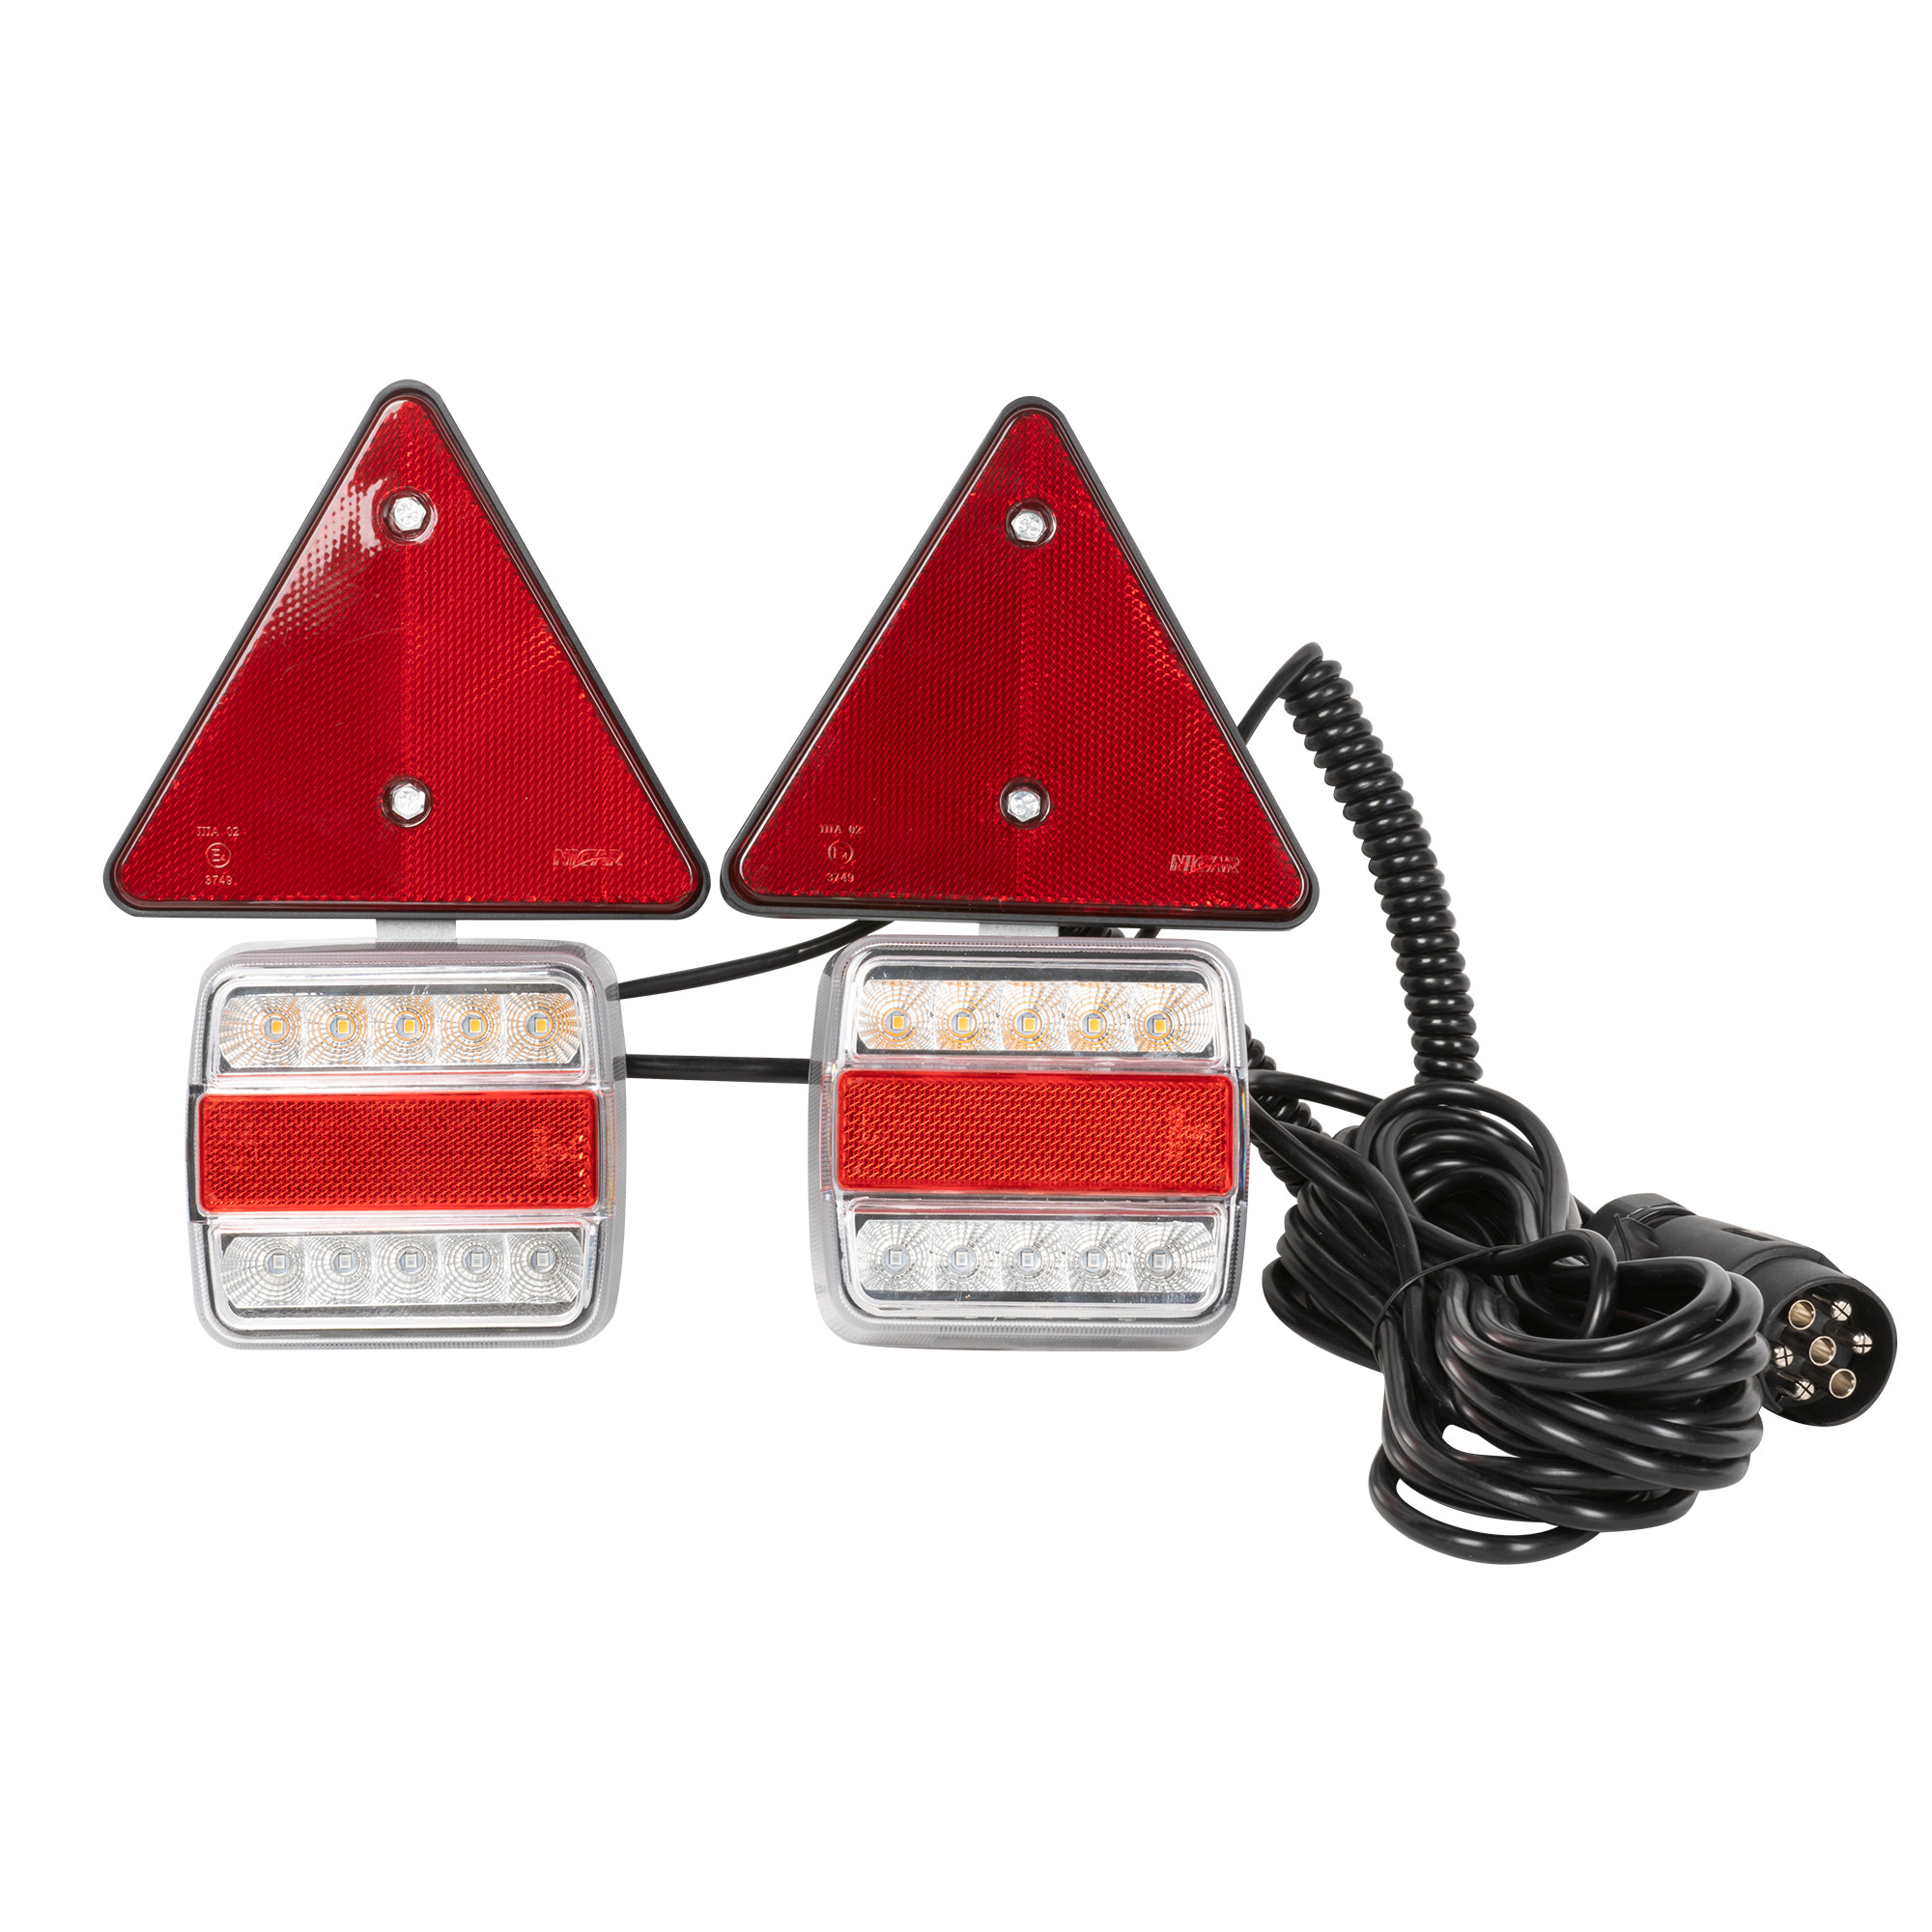 2 MAGNETIC REAR LIGHTS AND 2 TRIANGULAR REFLECTOR SET